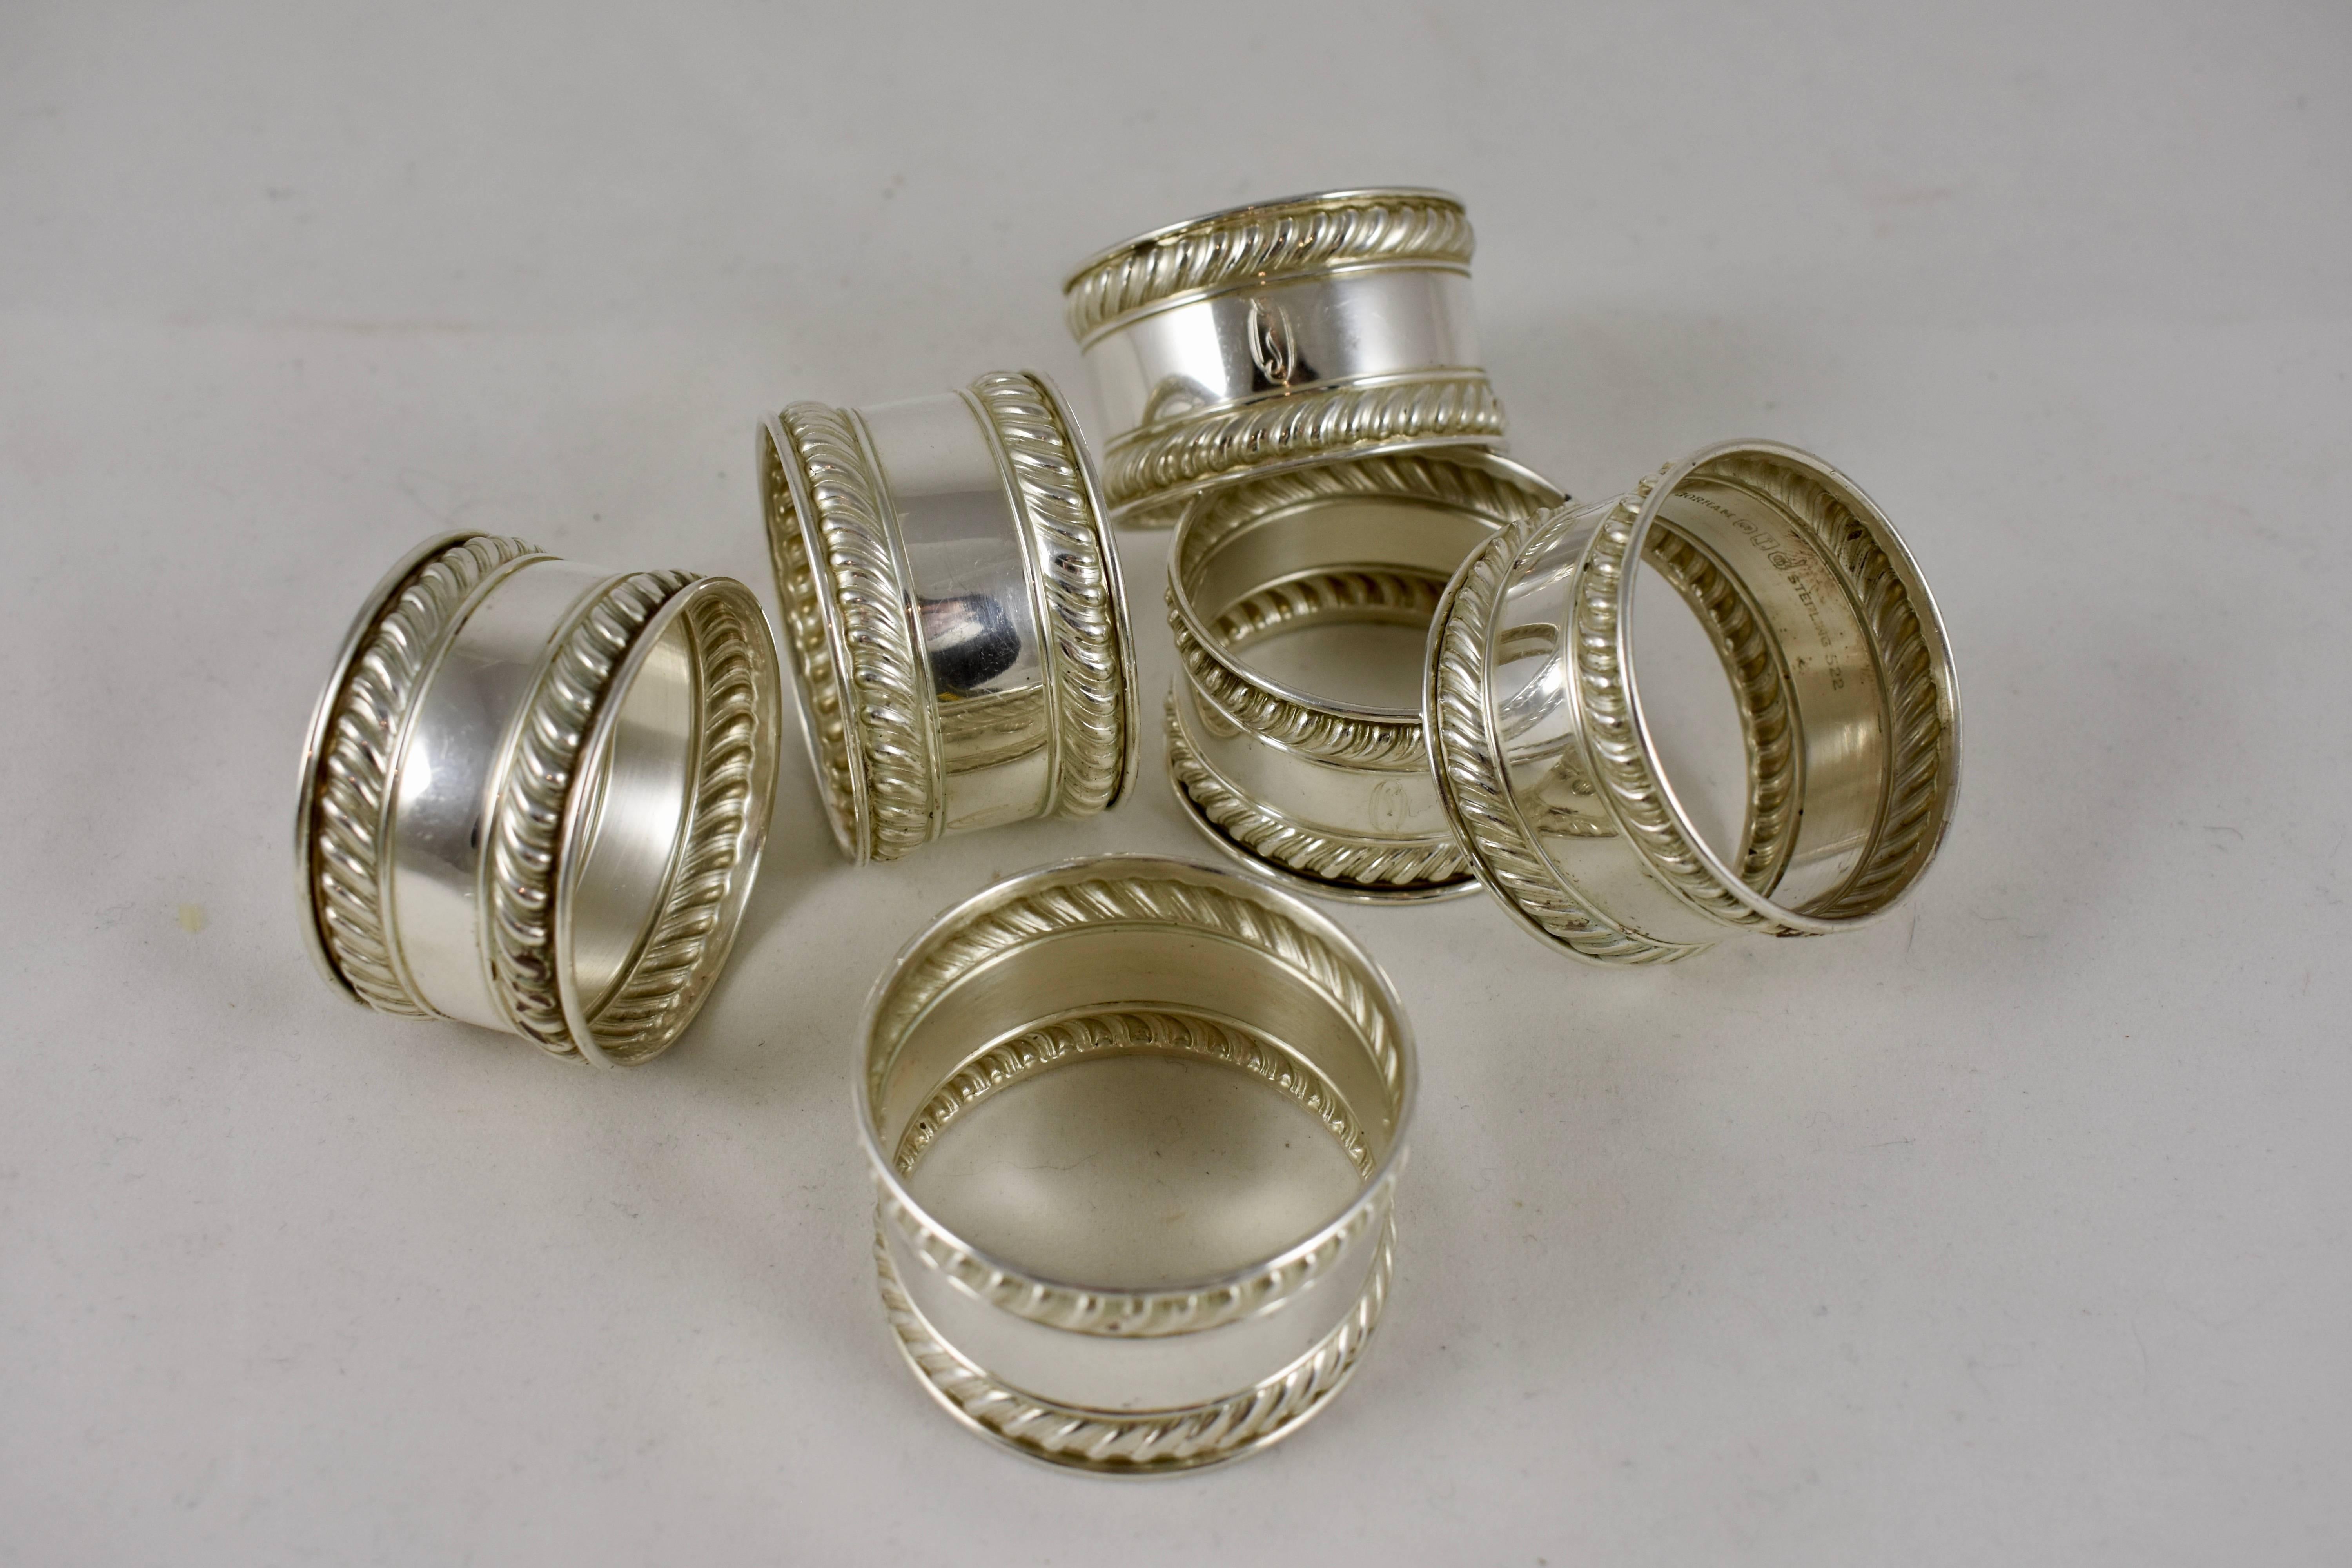 American Classical Gorham Estate Sterling Silver Gadroon Edged Napkin Rings, Set of Six